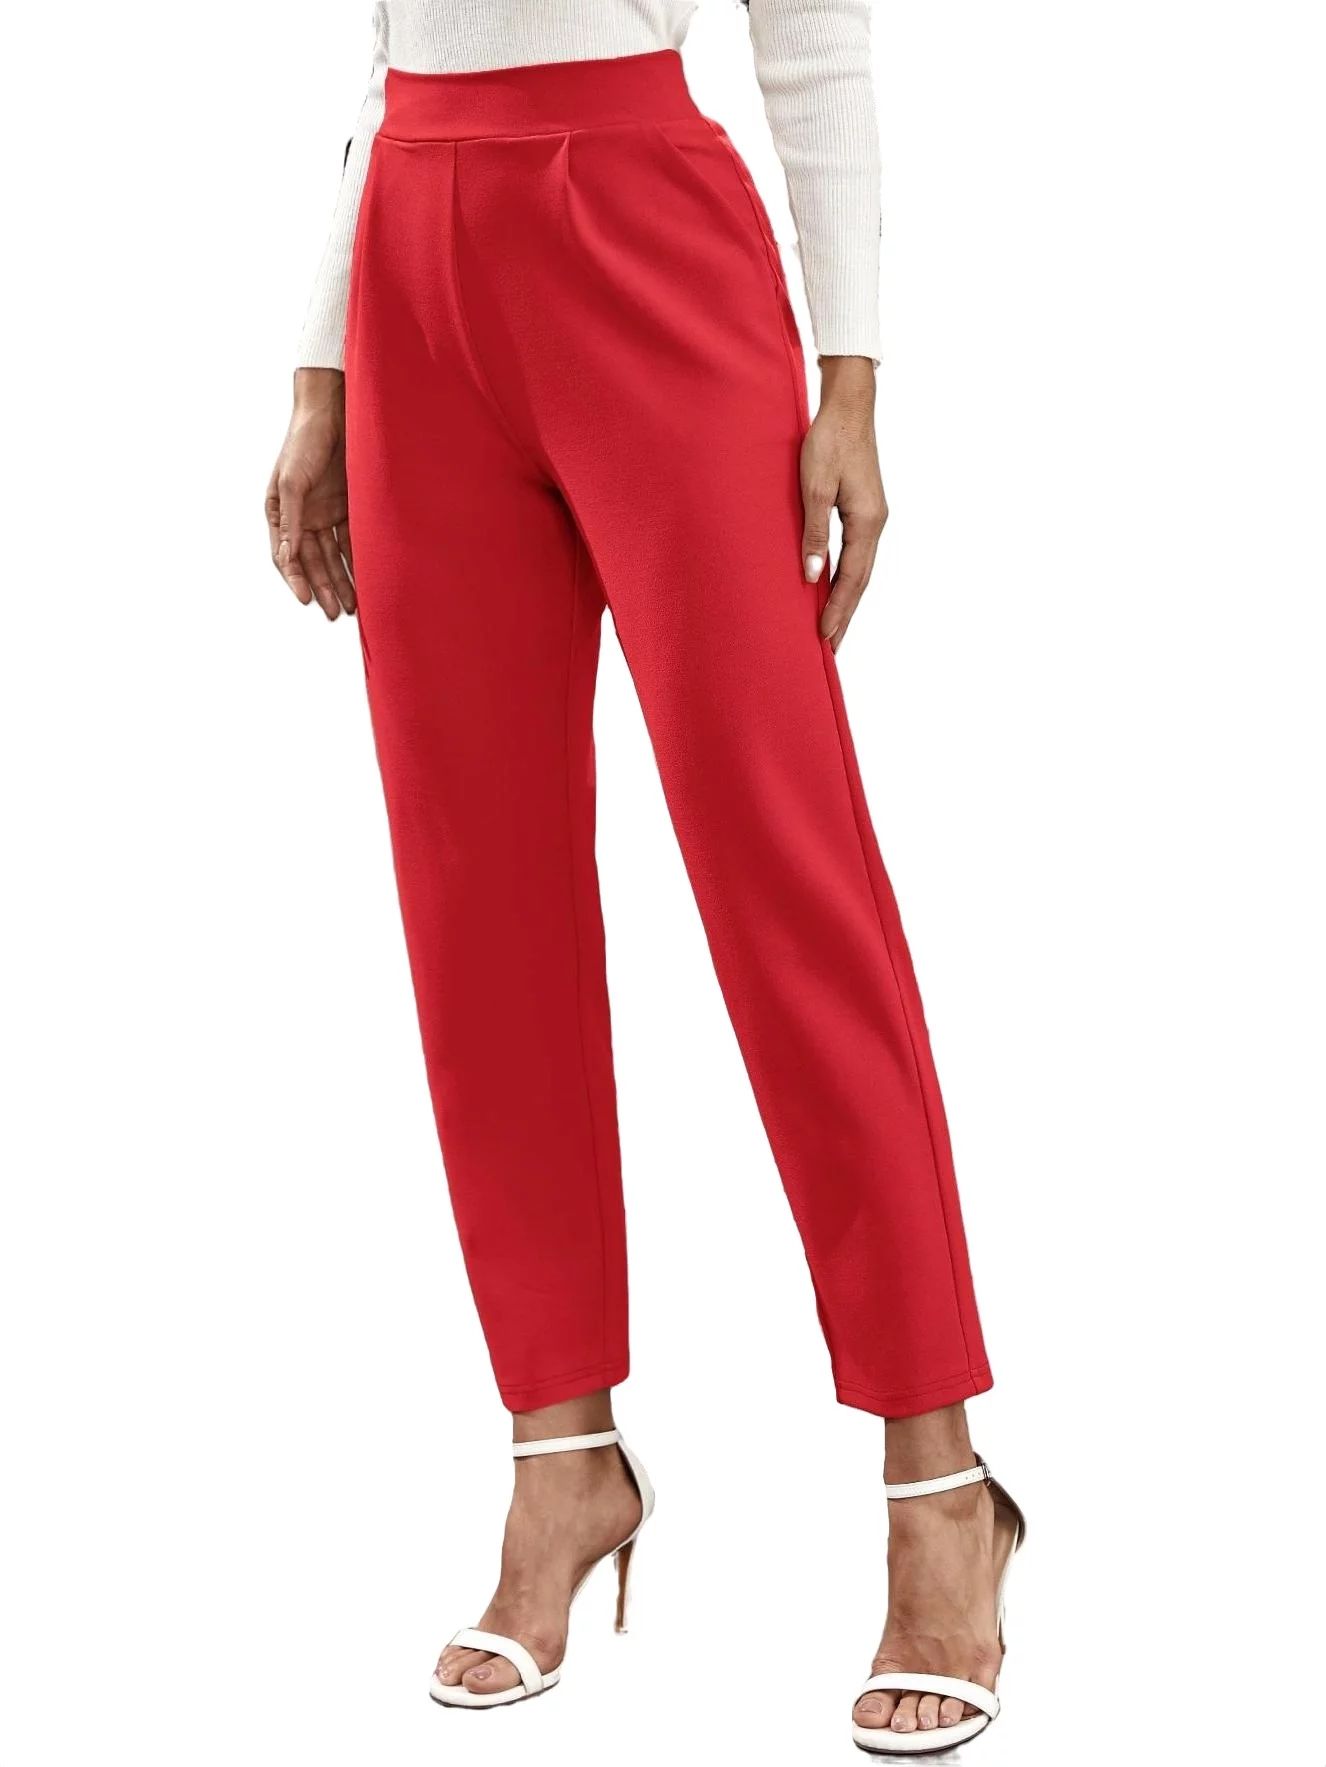 Women's Pants Solid High Waist Tapered Pants Red S | Walmart (US)